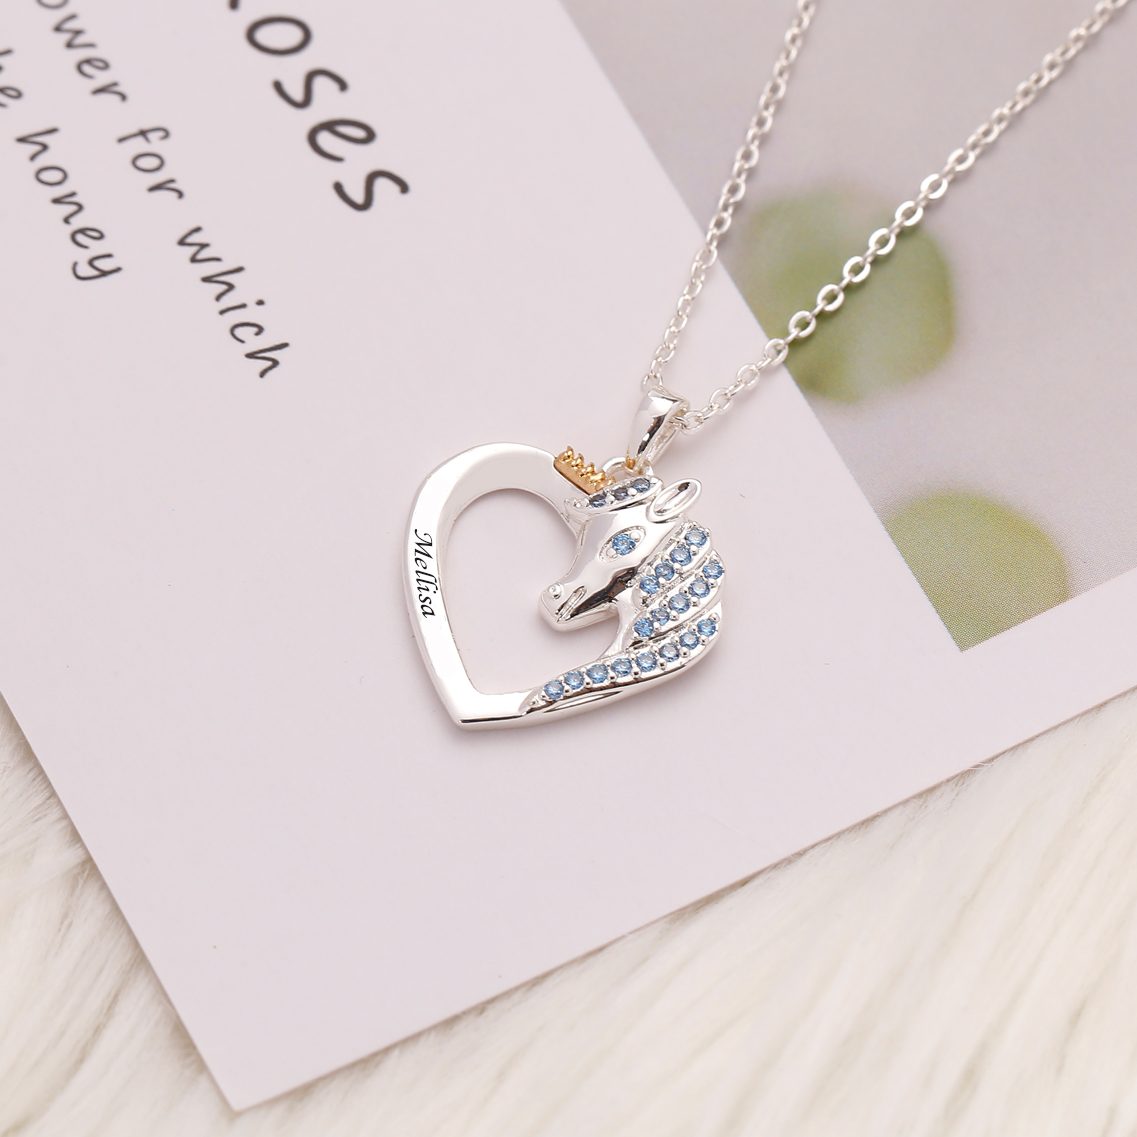 [CUSTOM NAME] To My GRANDDAUGHTER "Never forget how much I love you as you grow older" Unicorn Necklace - SARAH'S WHISPER